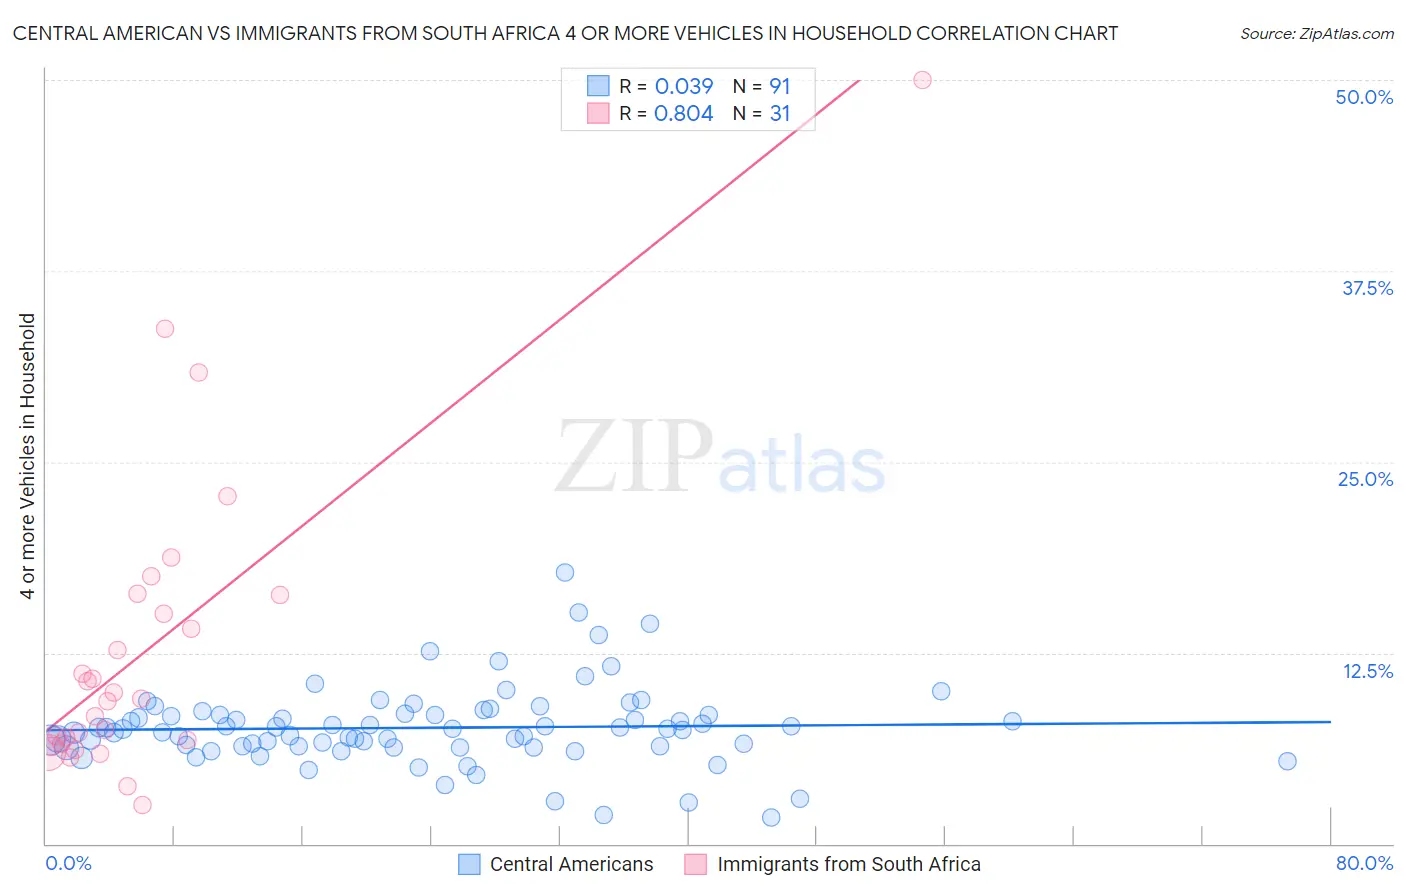 Central American vs Immigrants from South Africa 4 or more Vehicles in Household